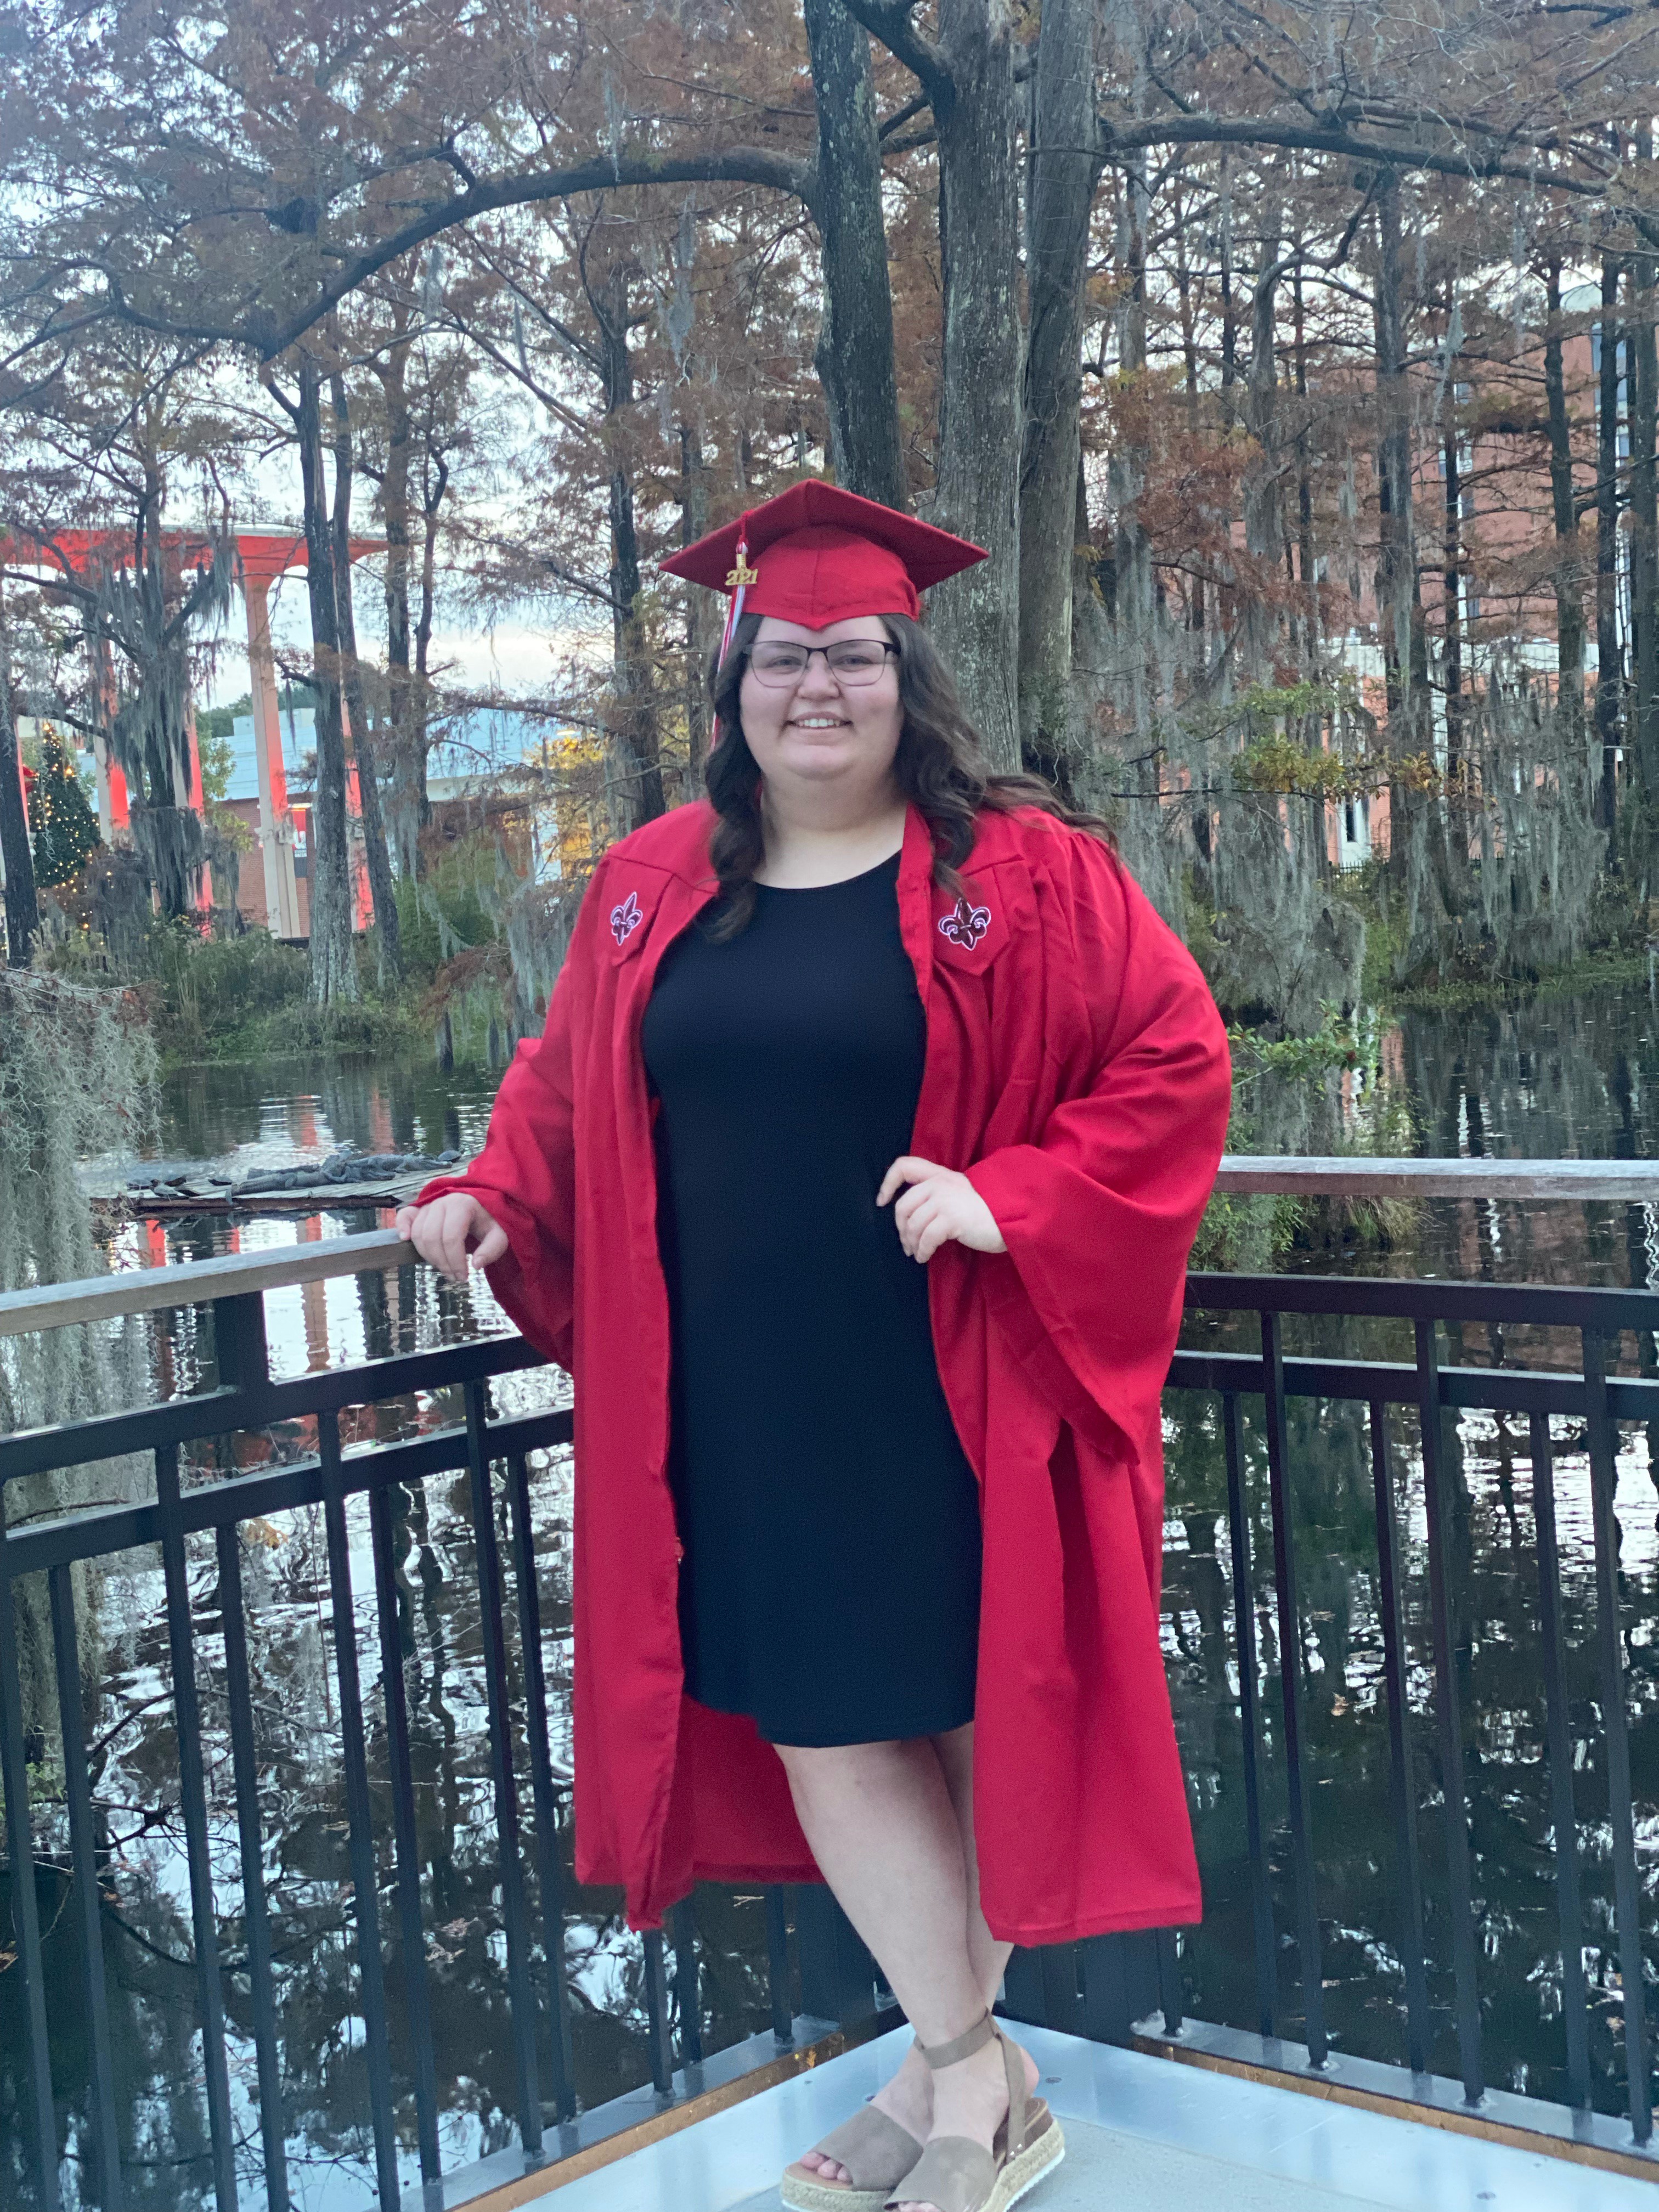 Kaylie Castille earned her B.S. in Health Services Administration online.